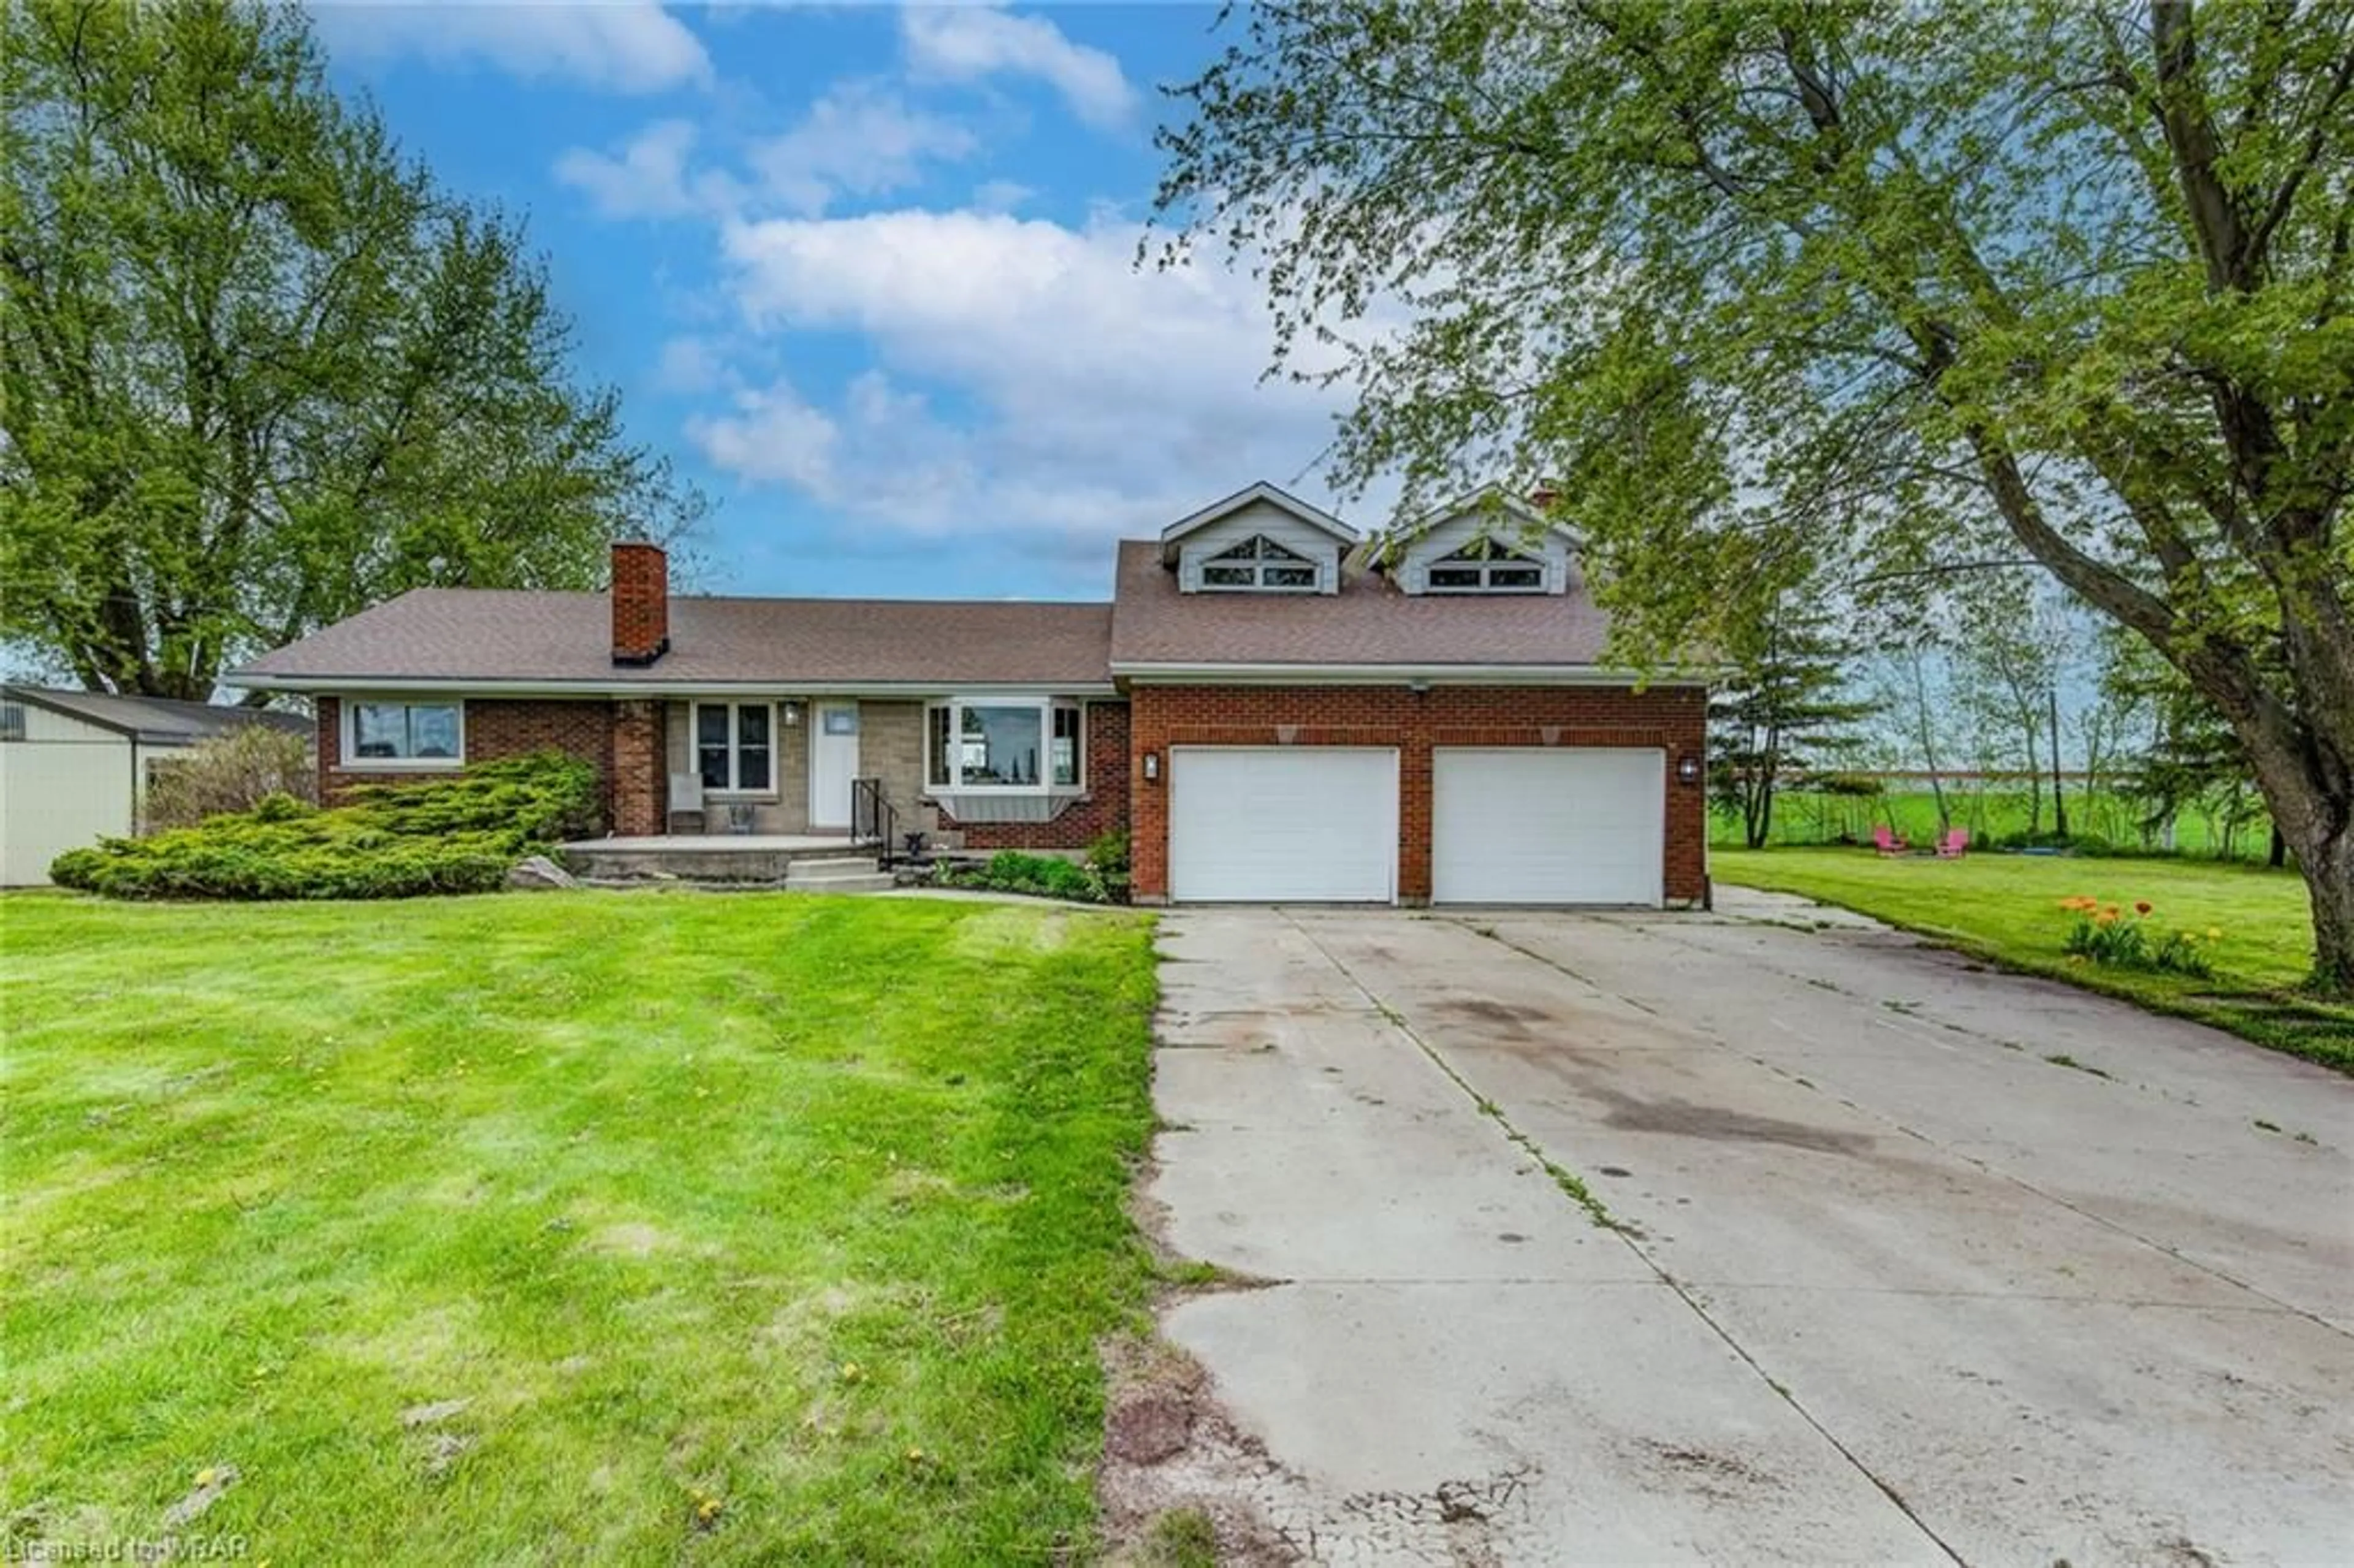 Home with brick exterior material for 3972 Perth Line 26 R R 2 Line, Stratford Ontario N5A 6S3